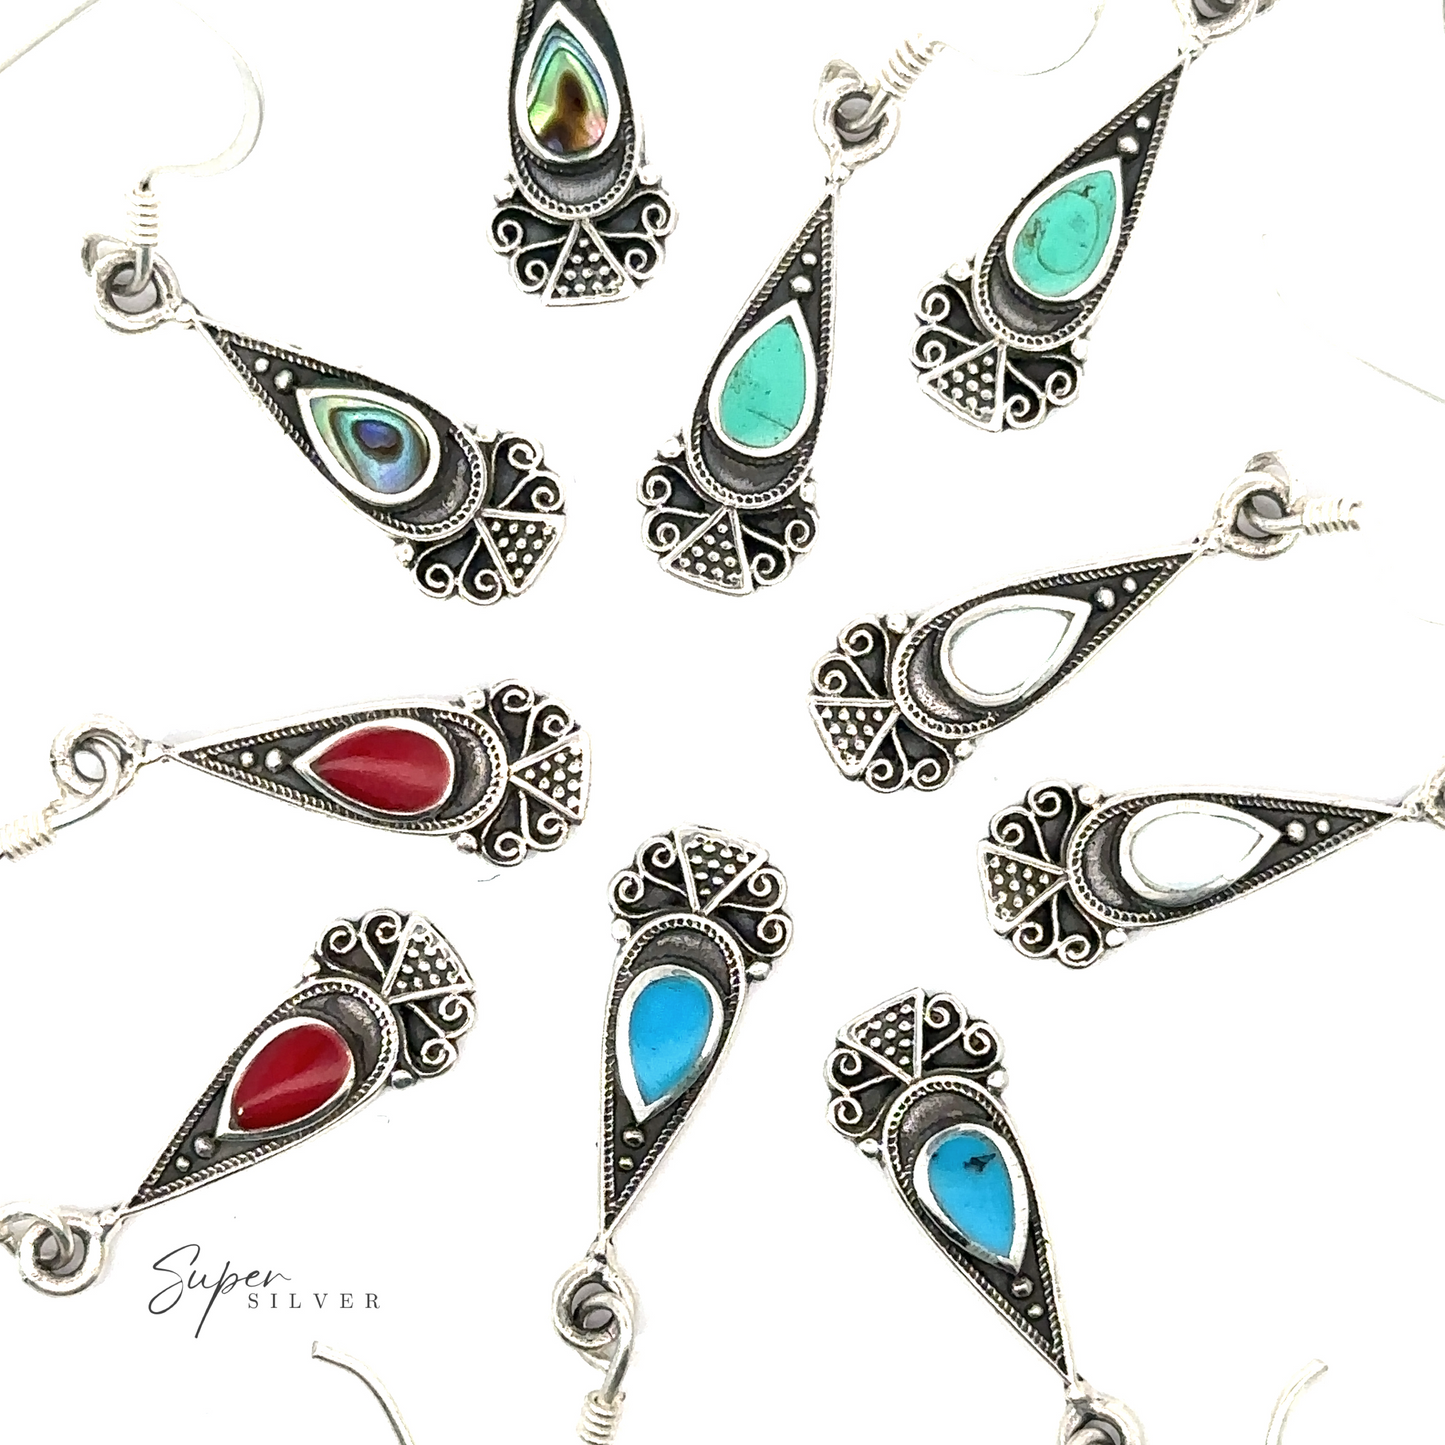 A group of Bali Inspired Teardrop Shaped Earrings With Inlay Stones, perfect for a dainty look.